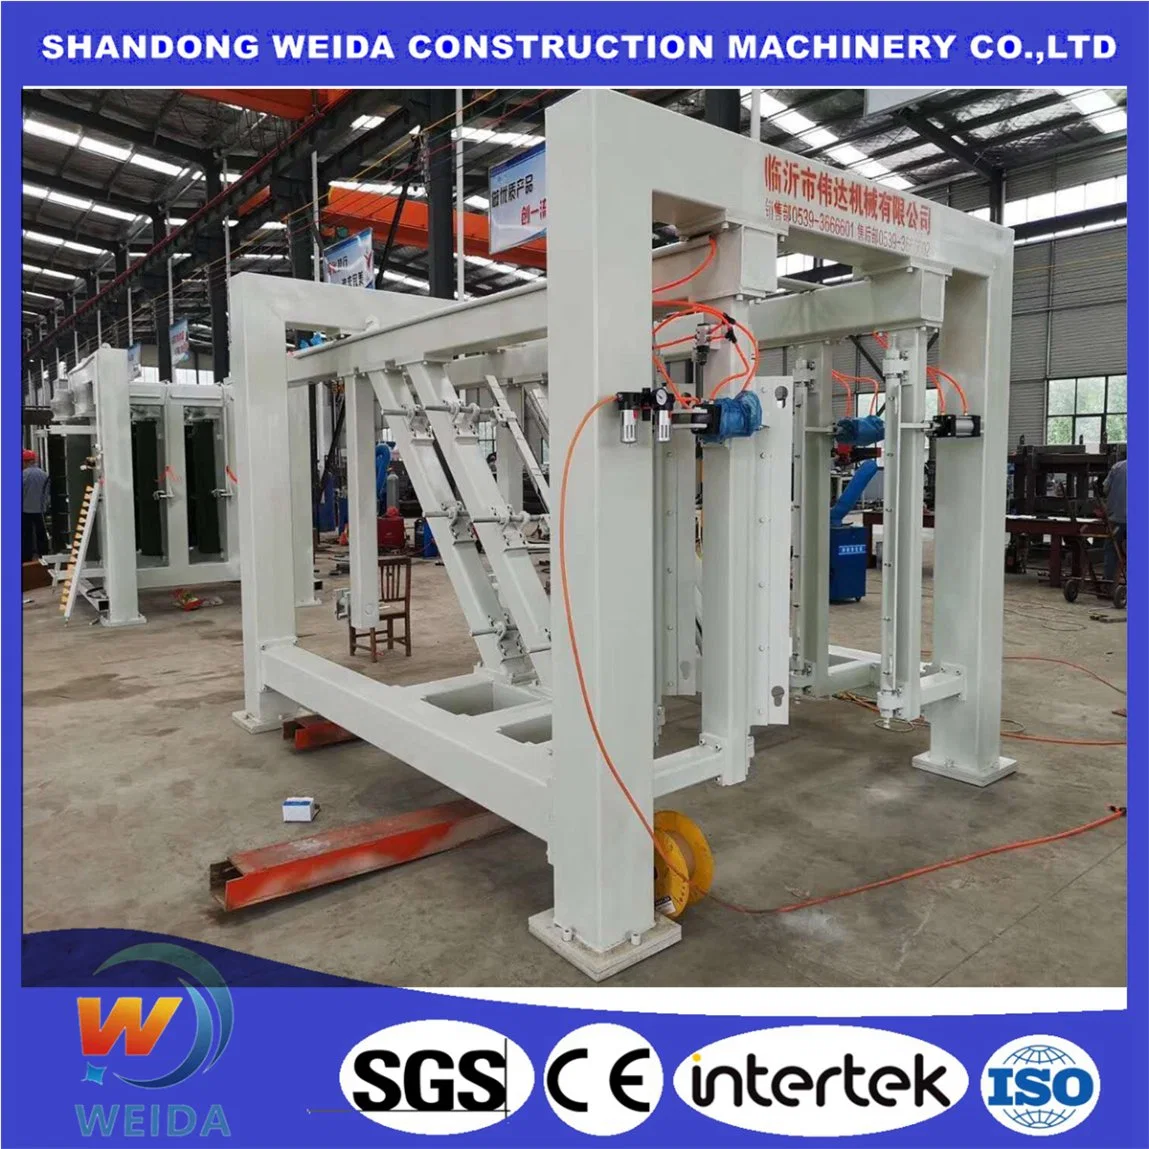 Low Cost Sound and Heat Insulation Block Making Machine AAC Panel Alc Panel Lightweight Fireproof Material Making Equipment